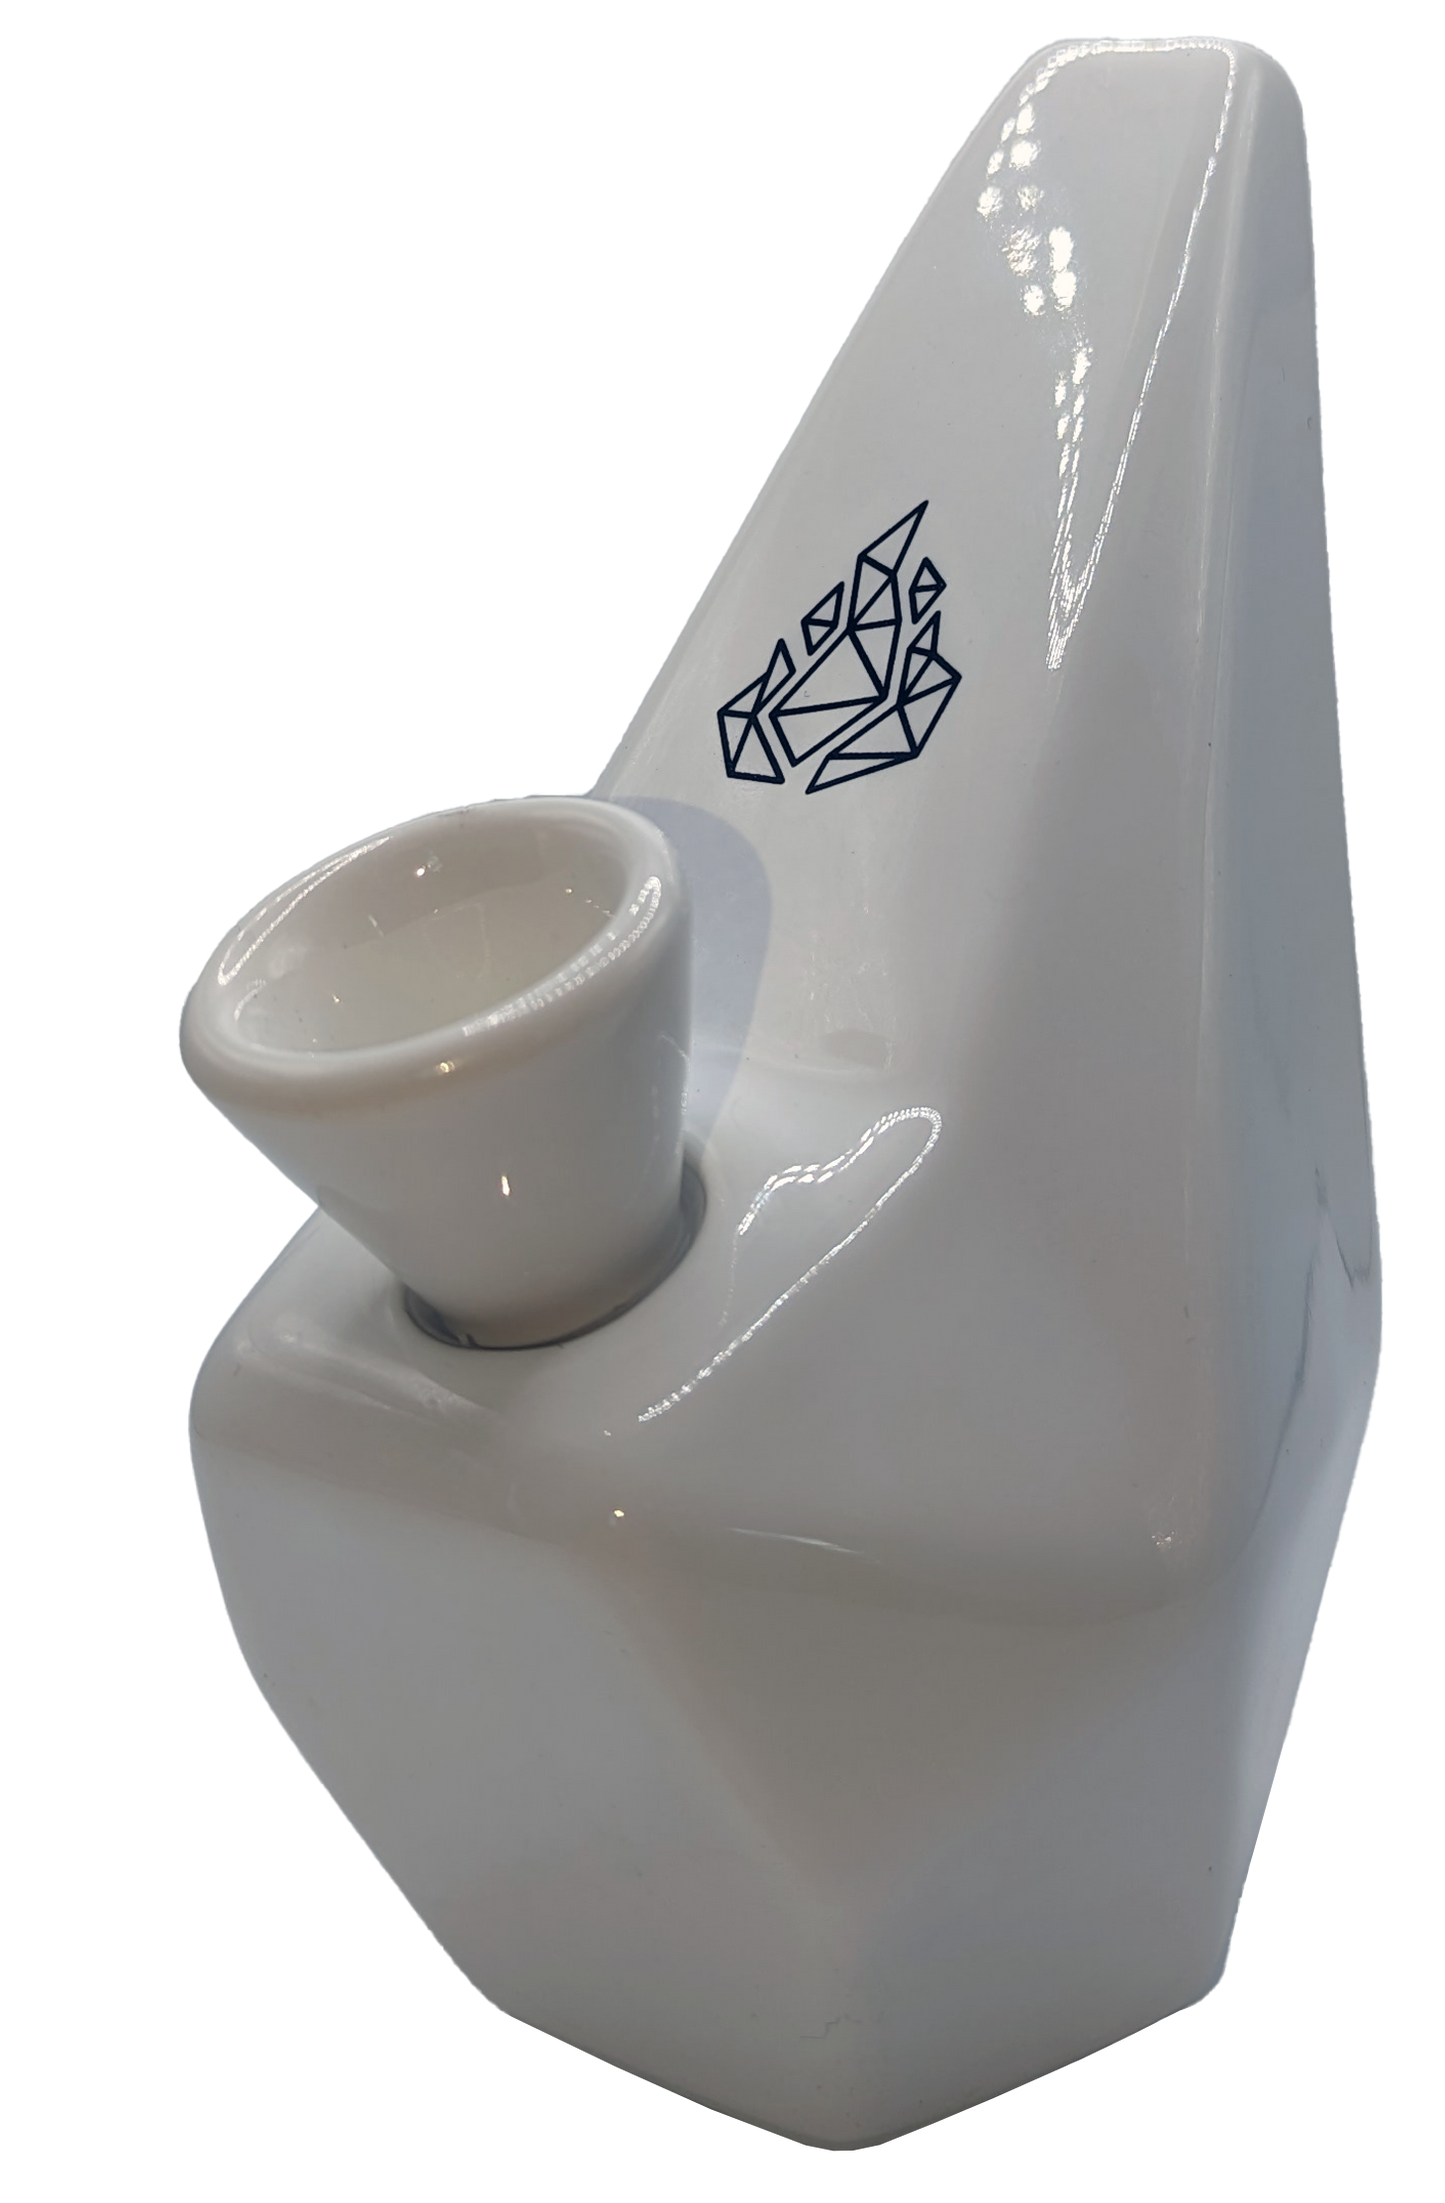 BRNT POLYGON - CERAMIC WATERPIPE About The Polygon provides a signature visual and smoking experience that’s unlike any water pipe in its field. Exemplifying ingenuity, its ergonomic base fits perfectly in your hand while providing maximum internal surface area allowing the smoke to cool down and create the perfect cannabis experience.